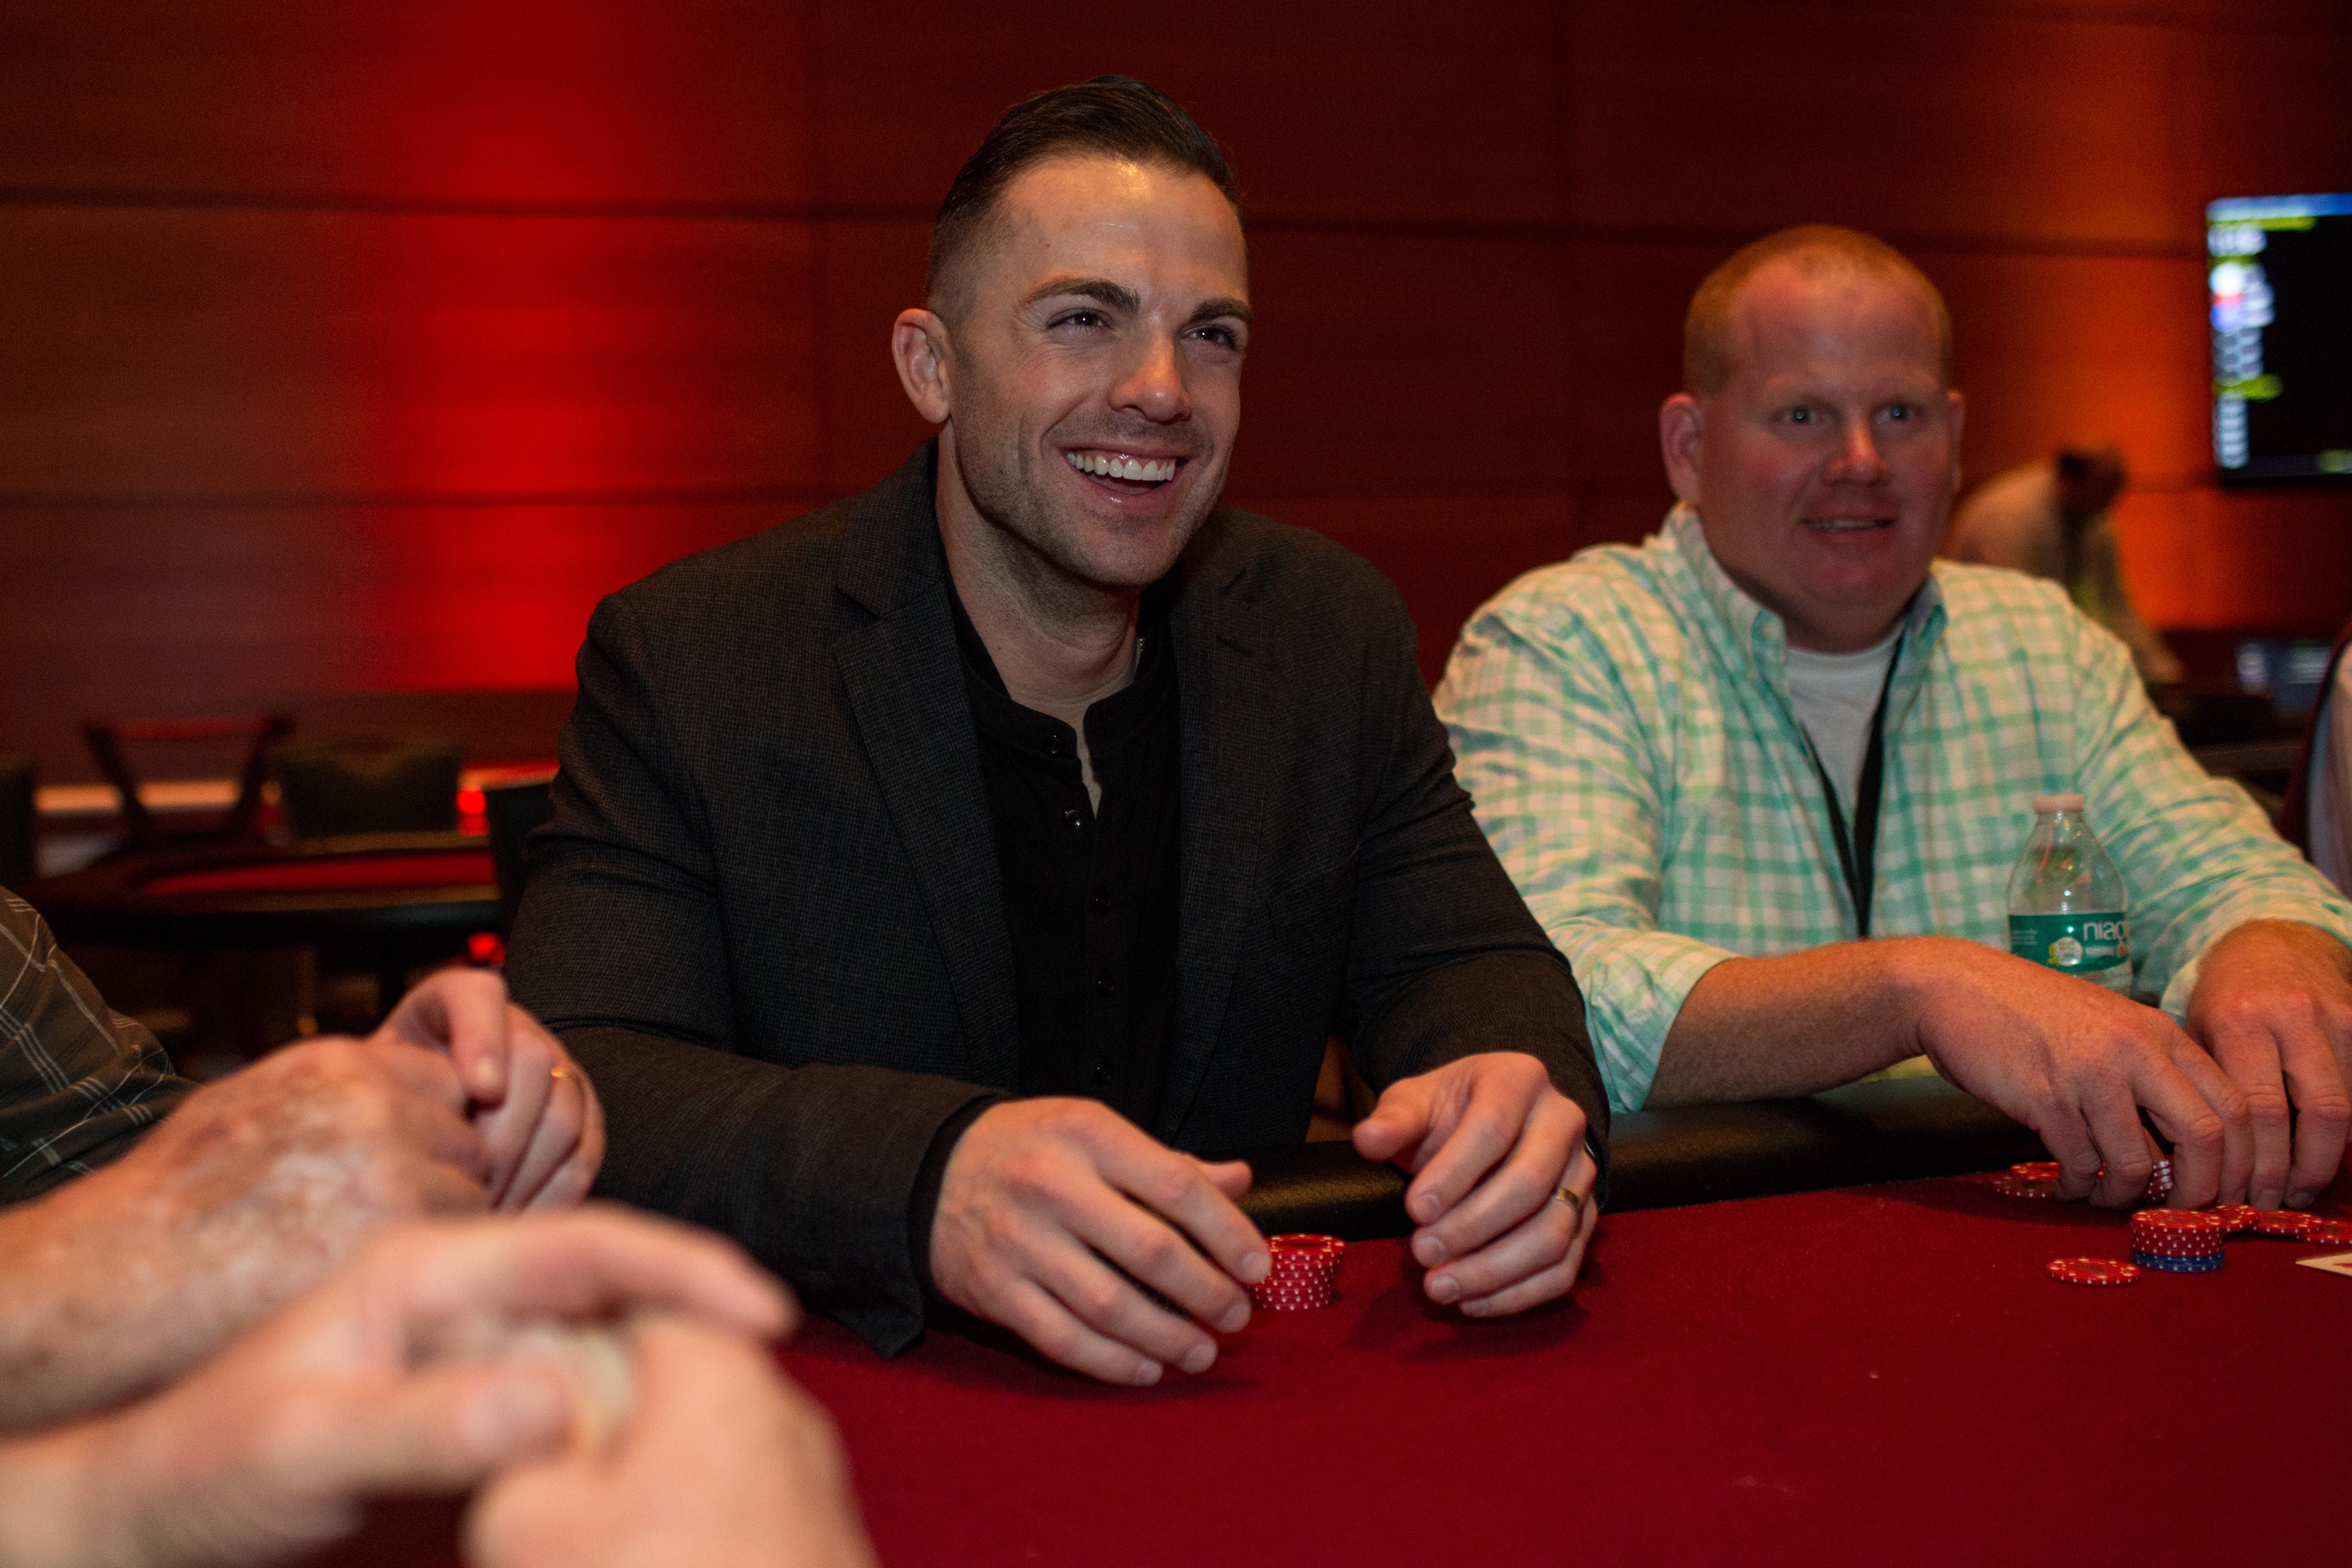 David Wright charity event raises $200,000 for CHKD